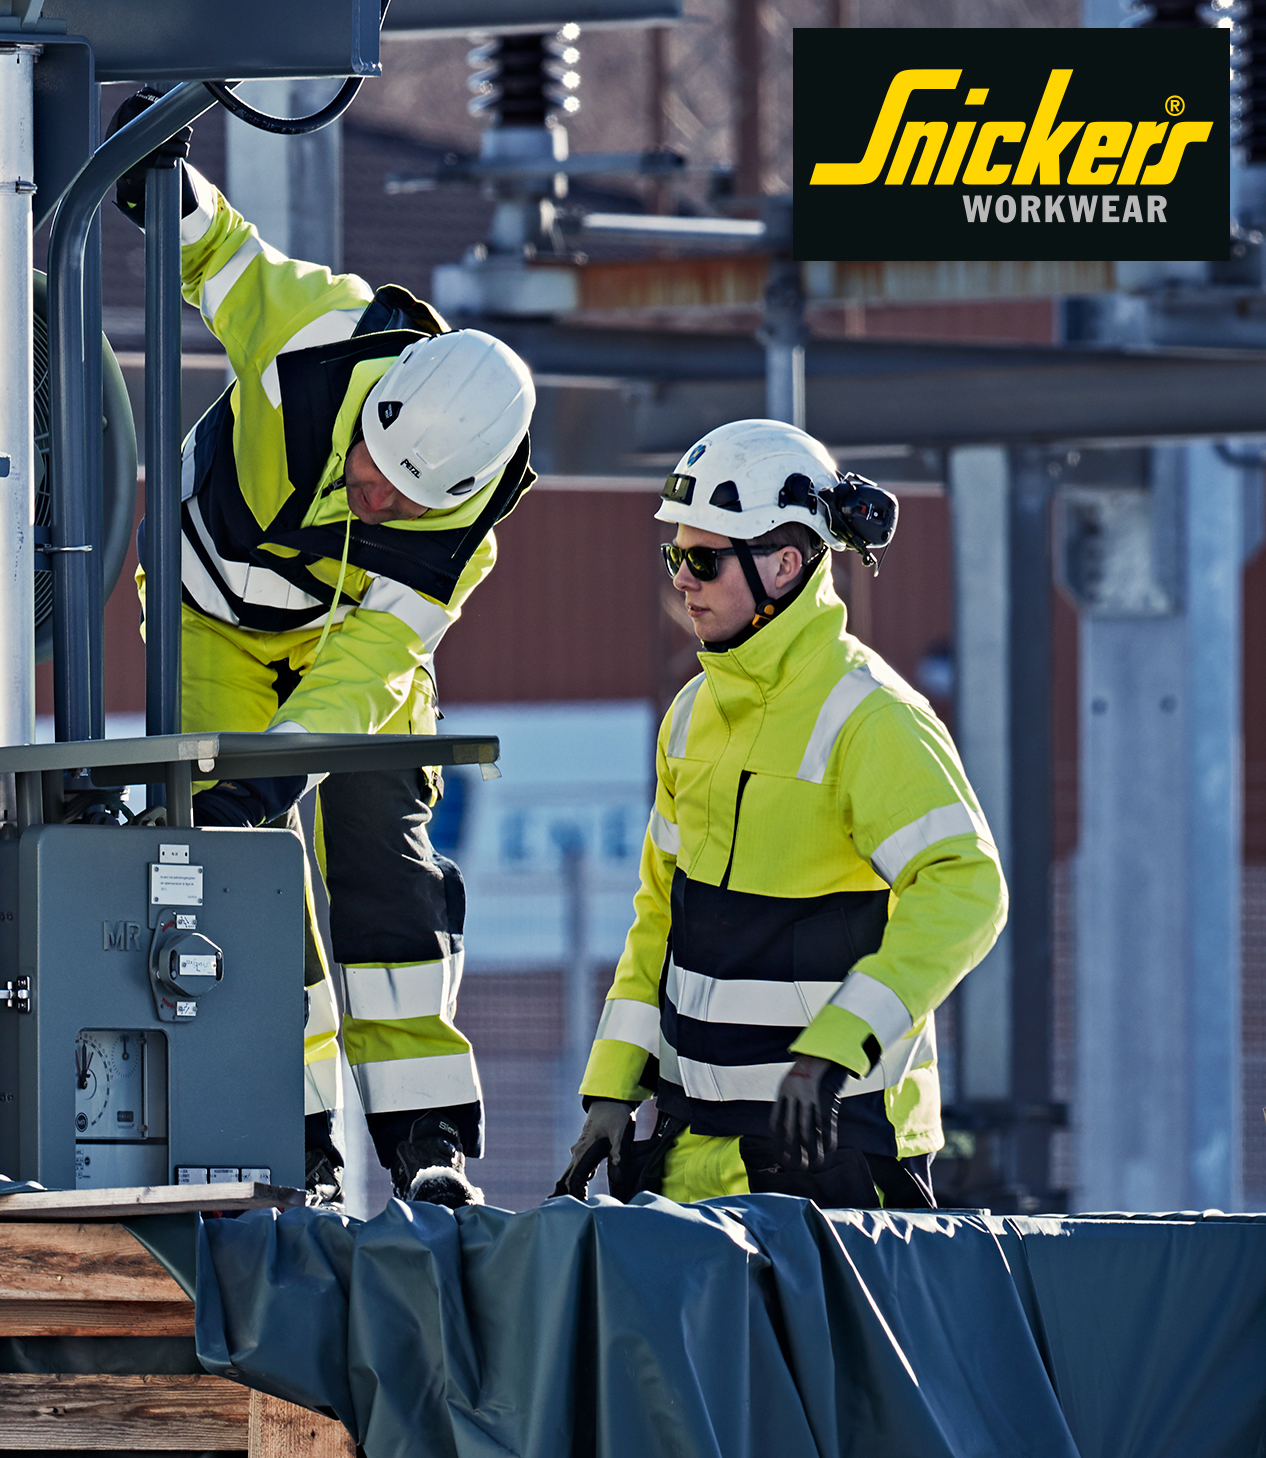 The NEW ProtecWork Protective Clothing From Snickers Workwear